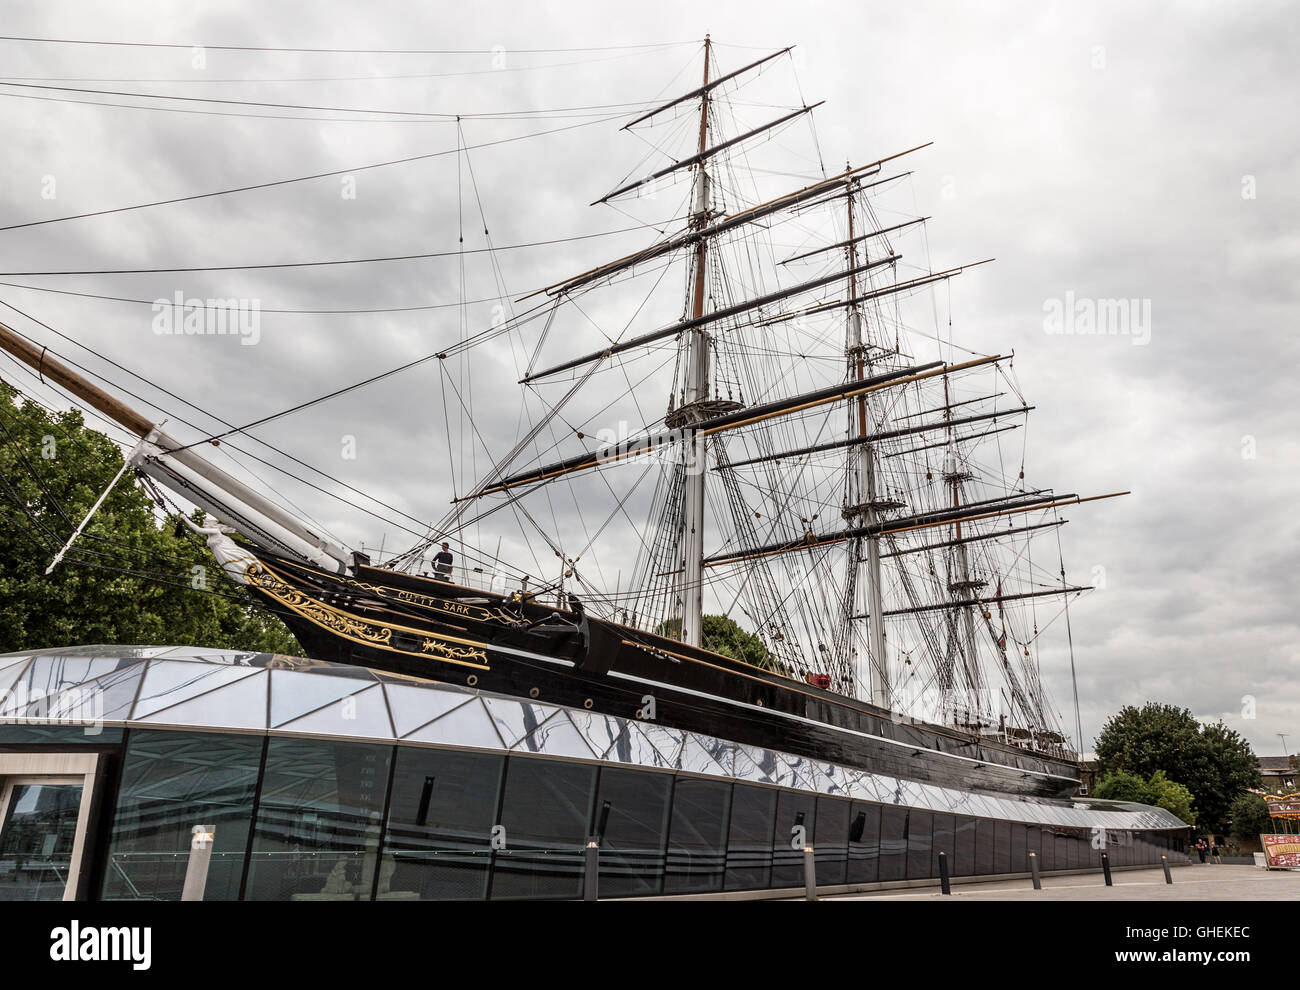 Cutty Sark, Royal Observatory Greenwich with Prime Meridian of the ...